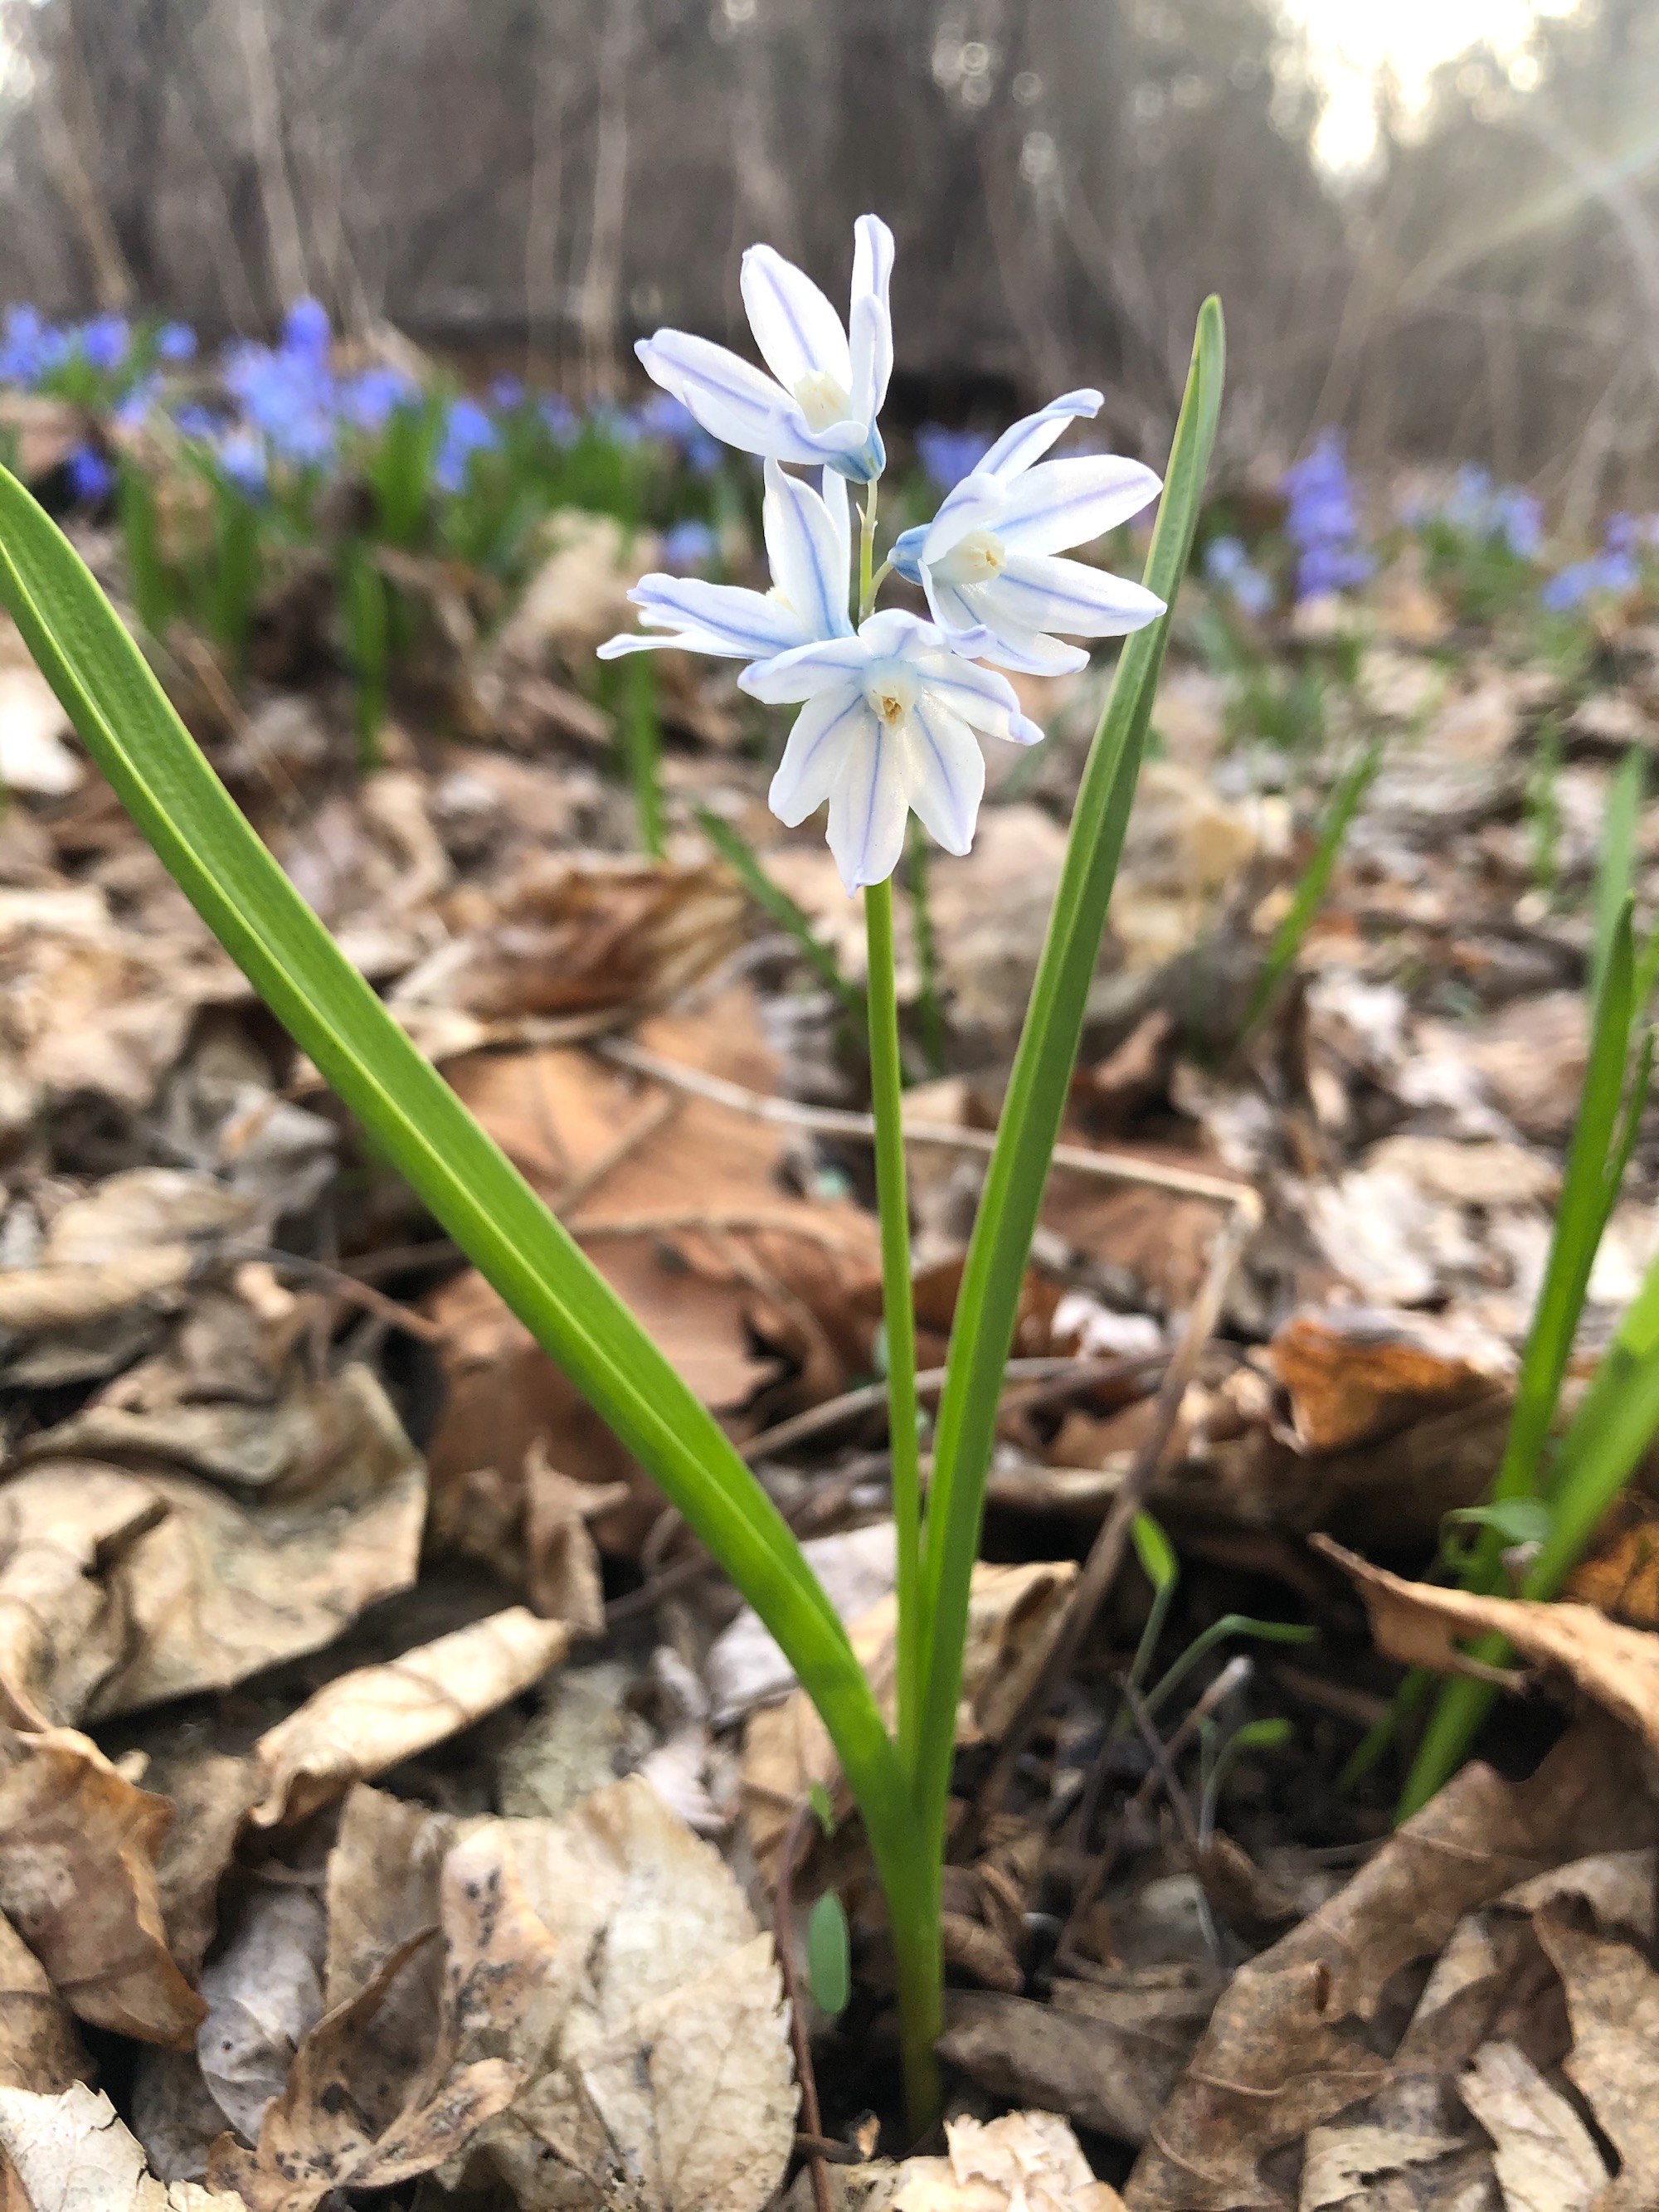 Striped Squill in woods near the Sycamore tree on Arbor Drive in Madison, Wisconsin on April 6, 2021.